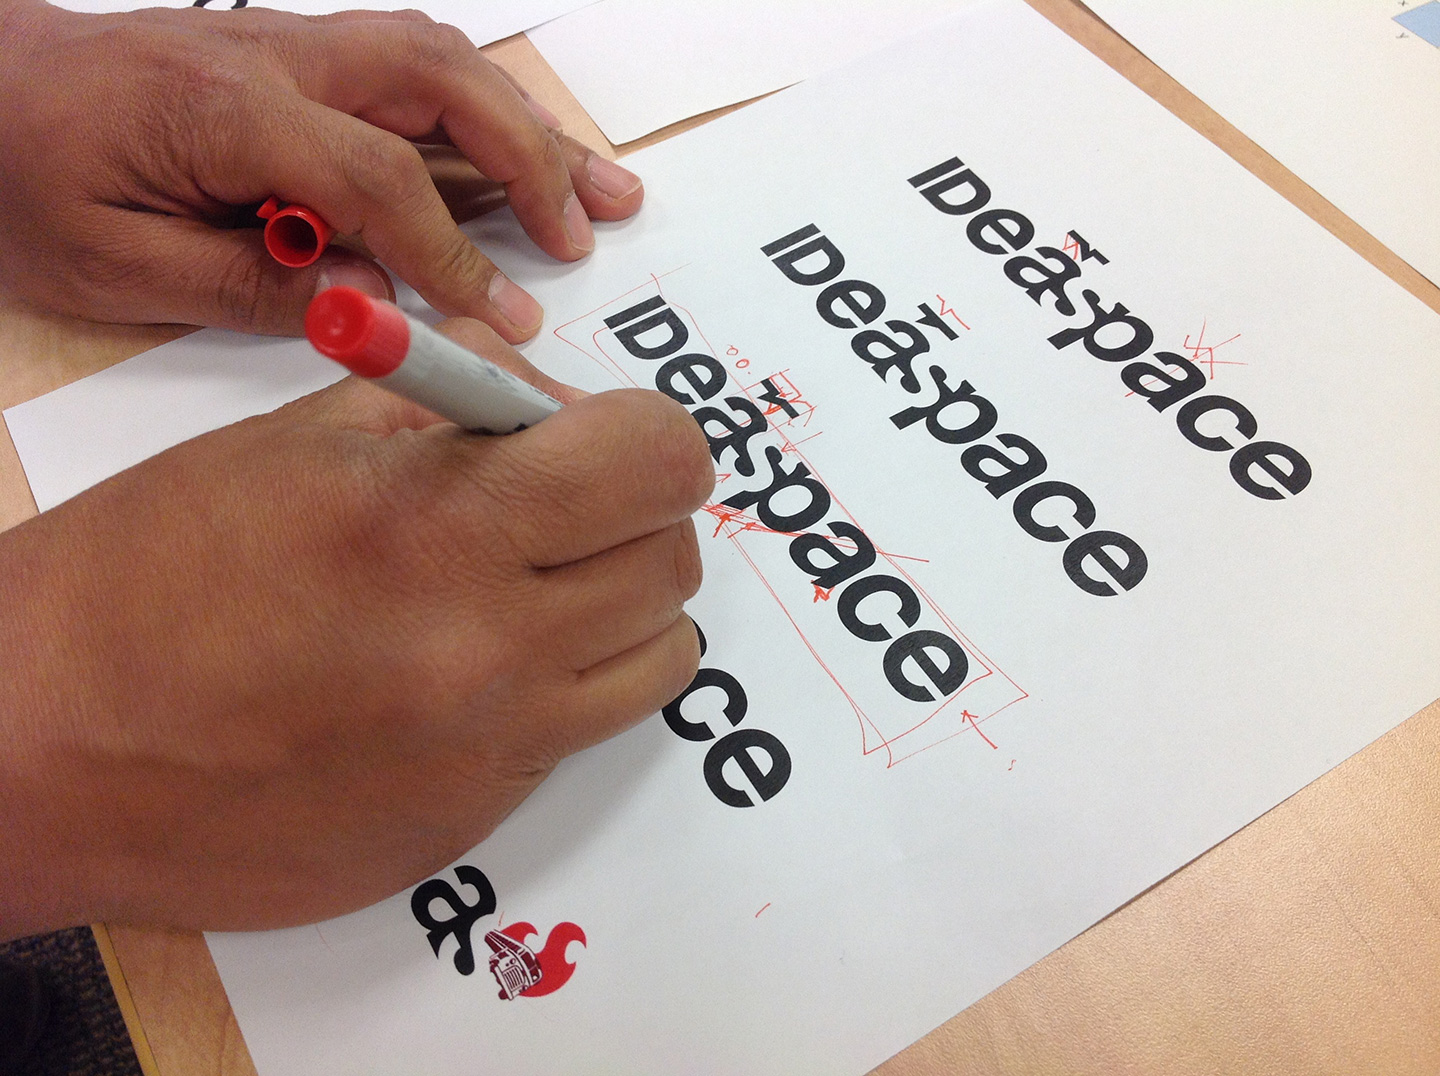 Hands marking up a page featuring IDeaspace logotypes with a red marker